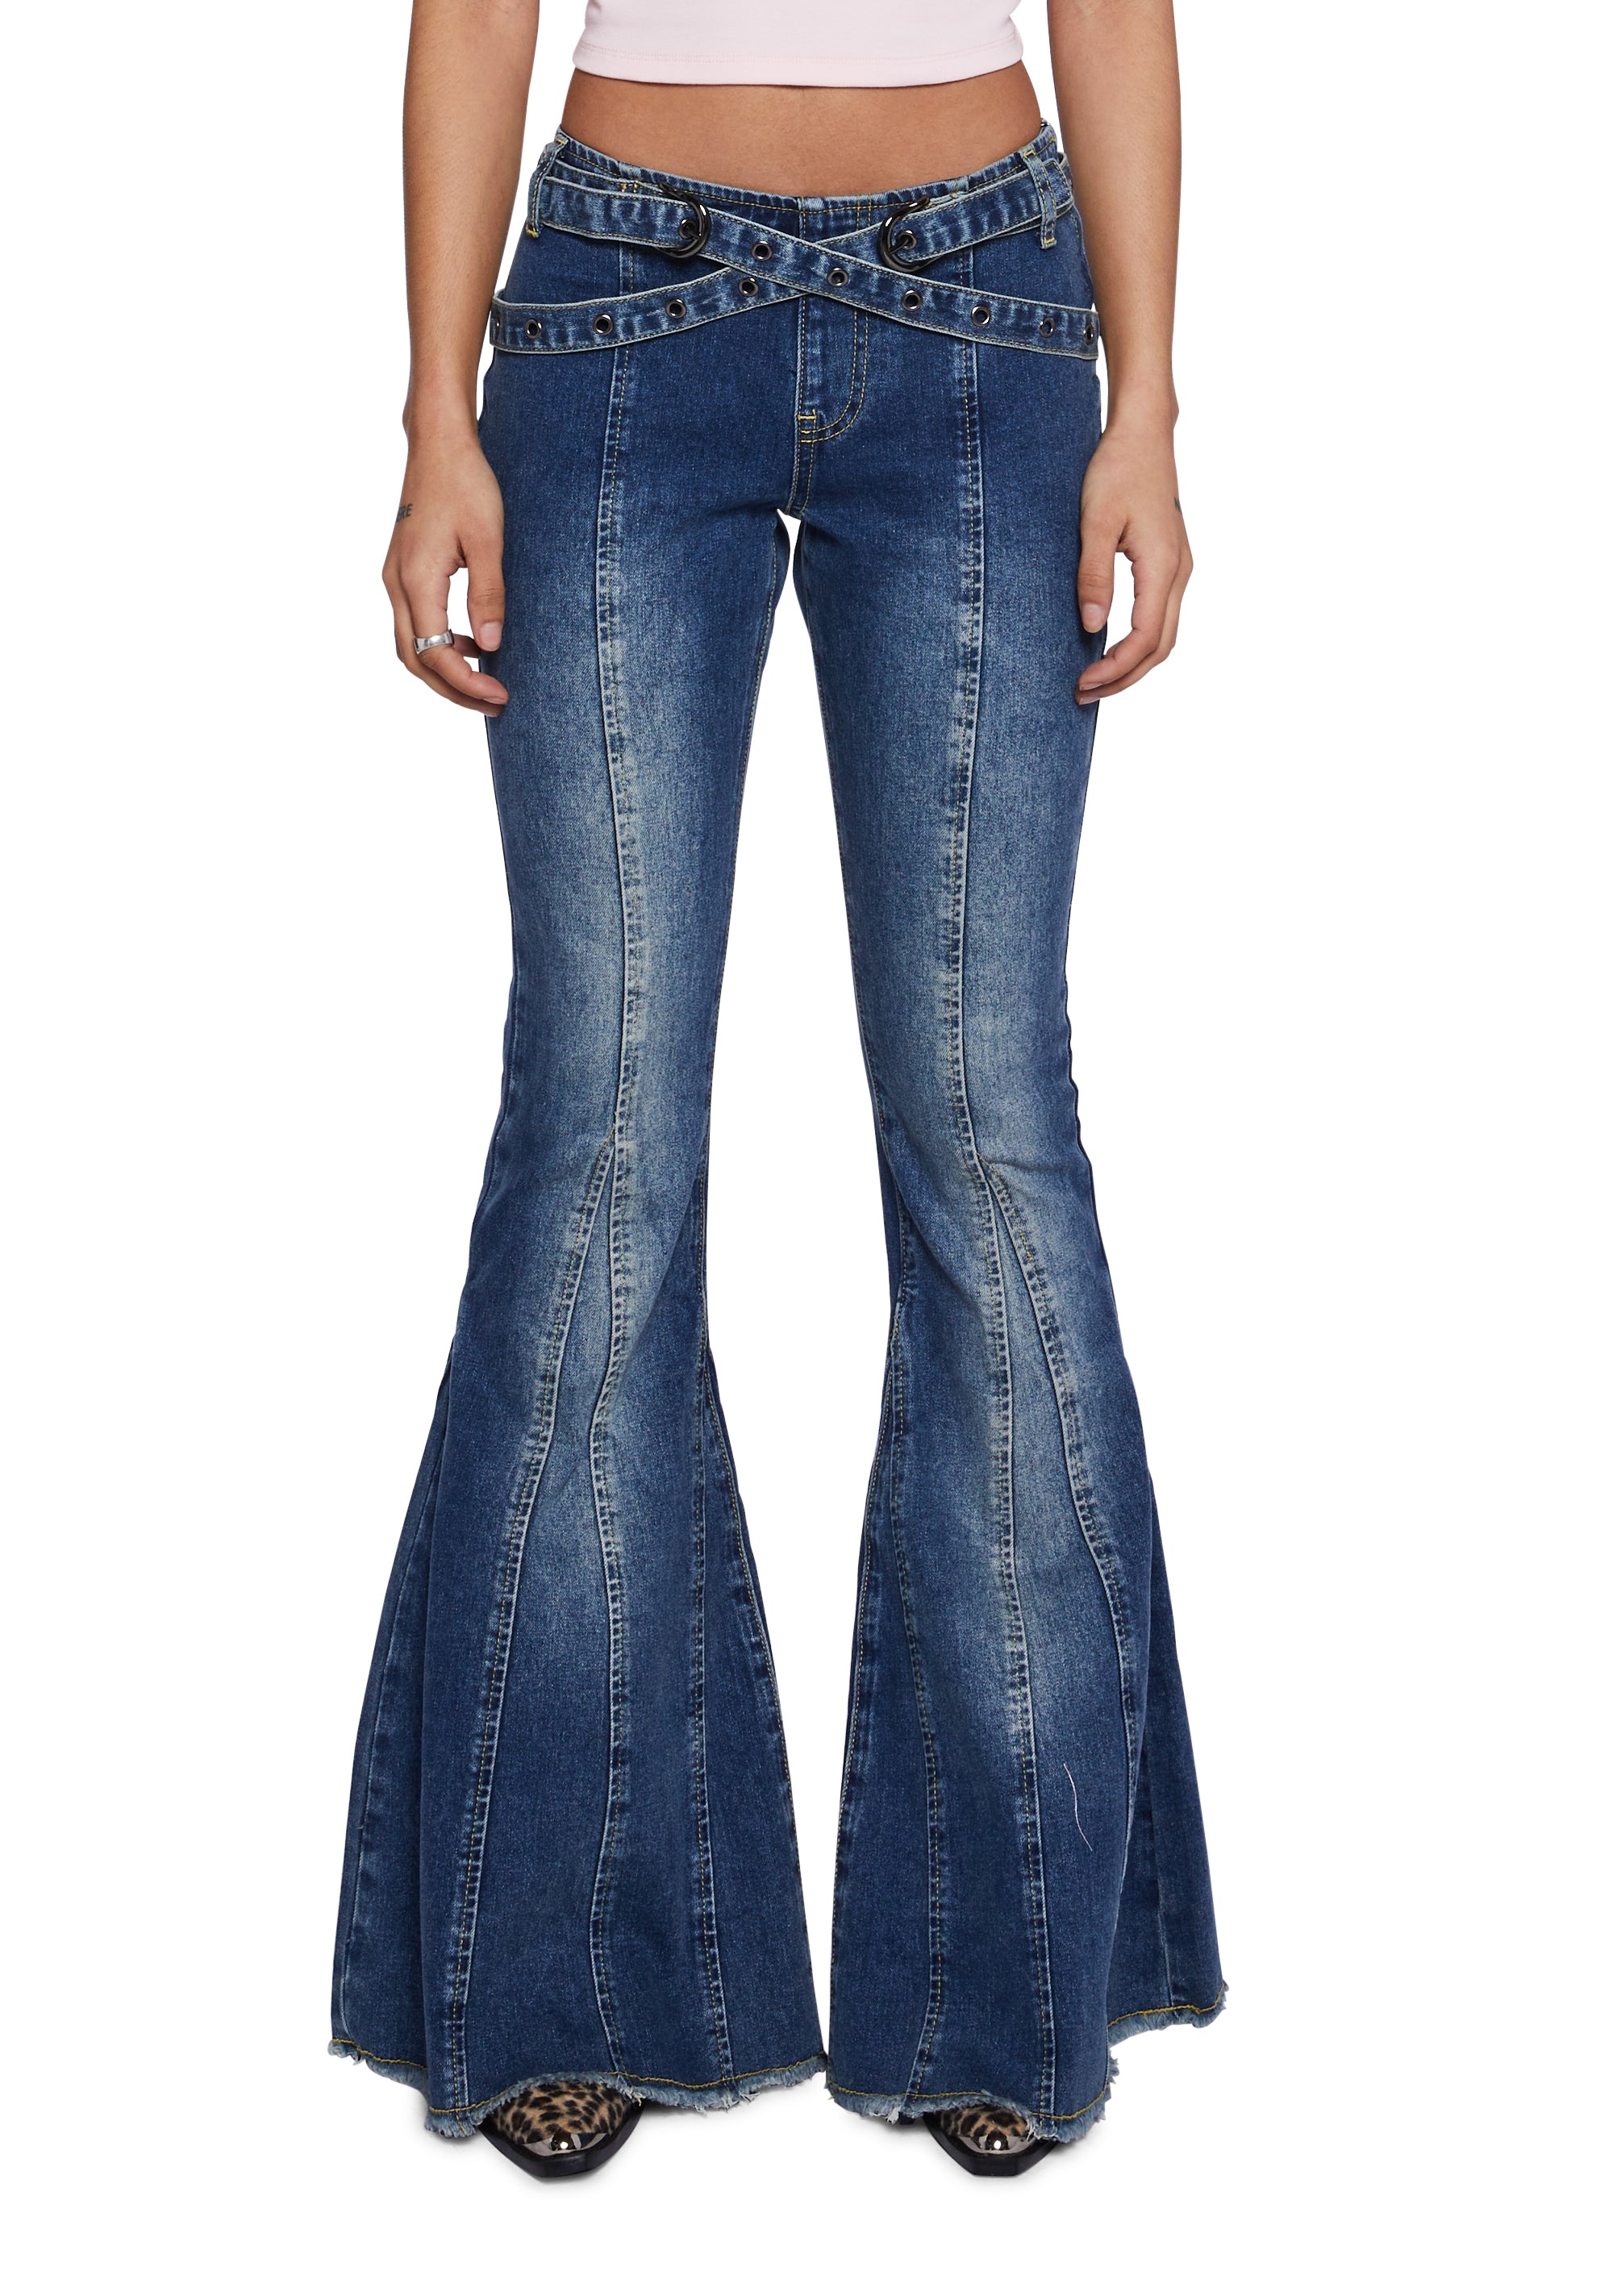 Generation Kiss Flared Belted Jeans - Blue